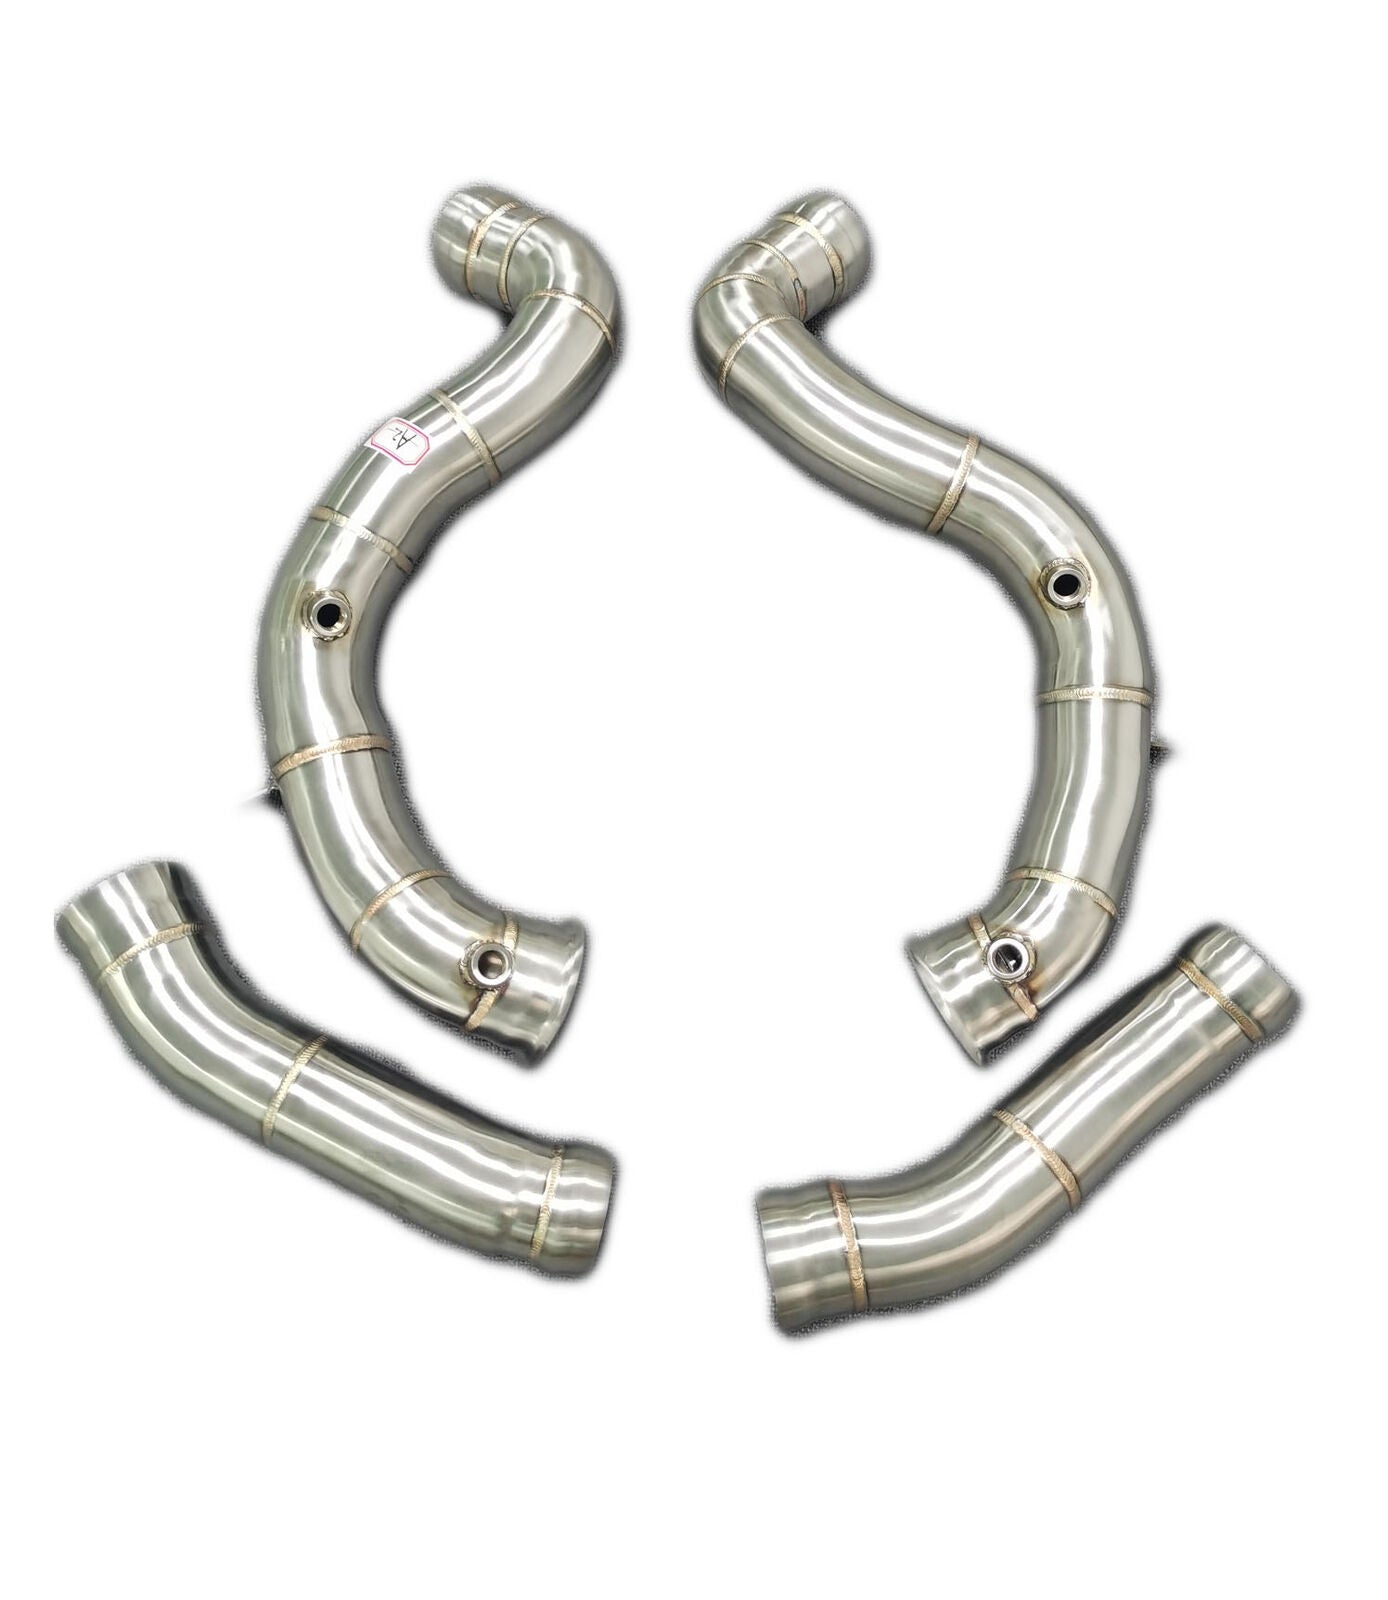 Stainless Steel Exhaust DECAT Race Downpipe for LHD Mercedes C63 AMG W205